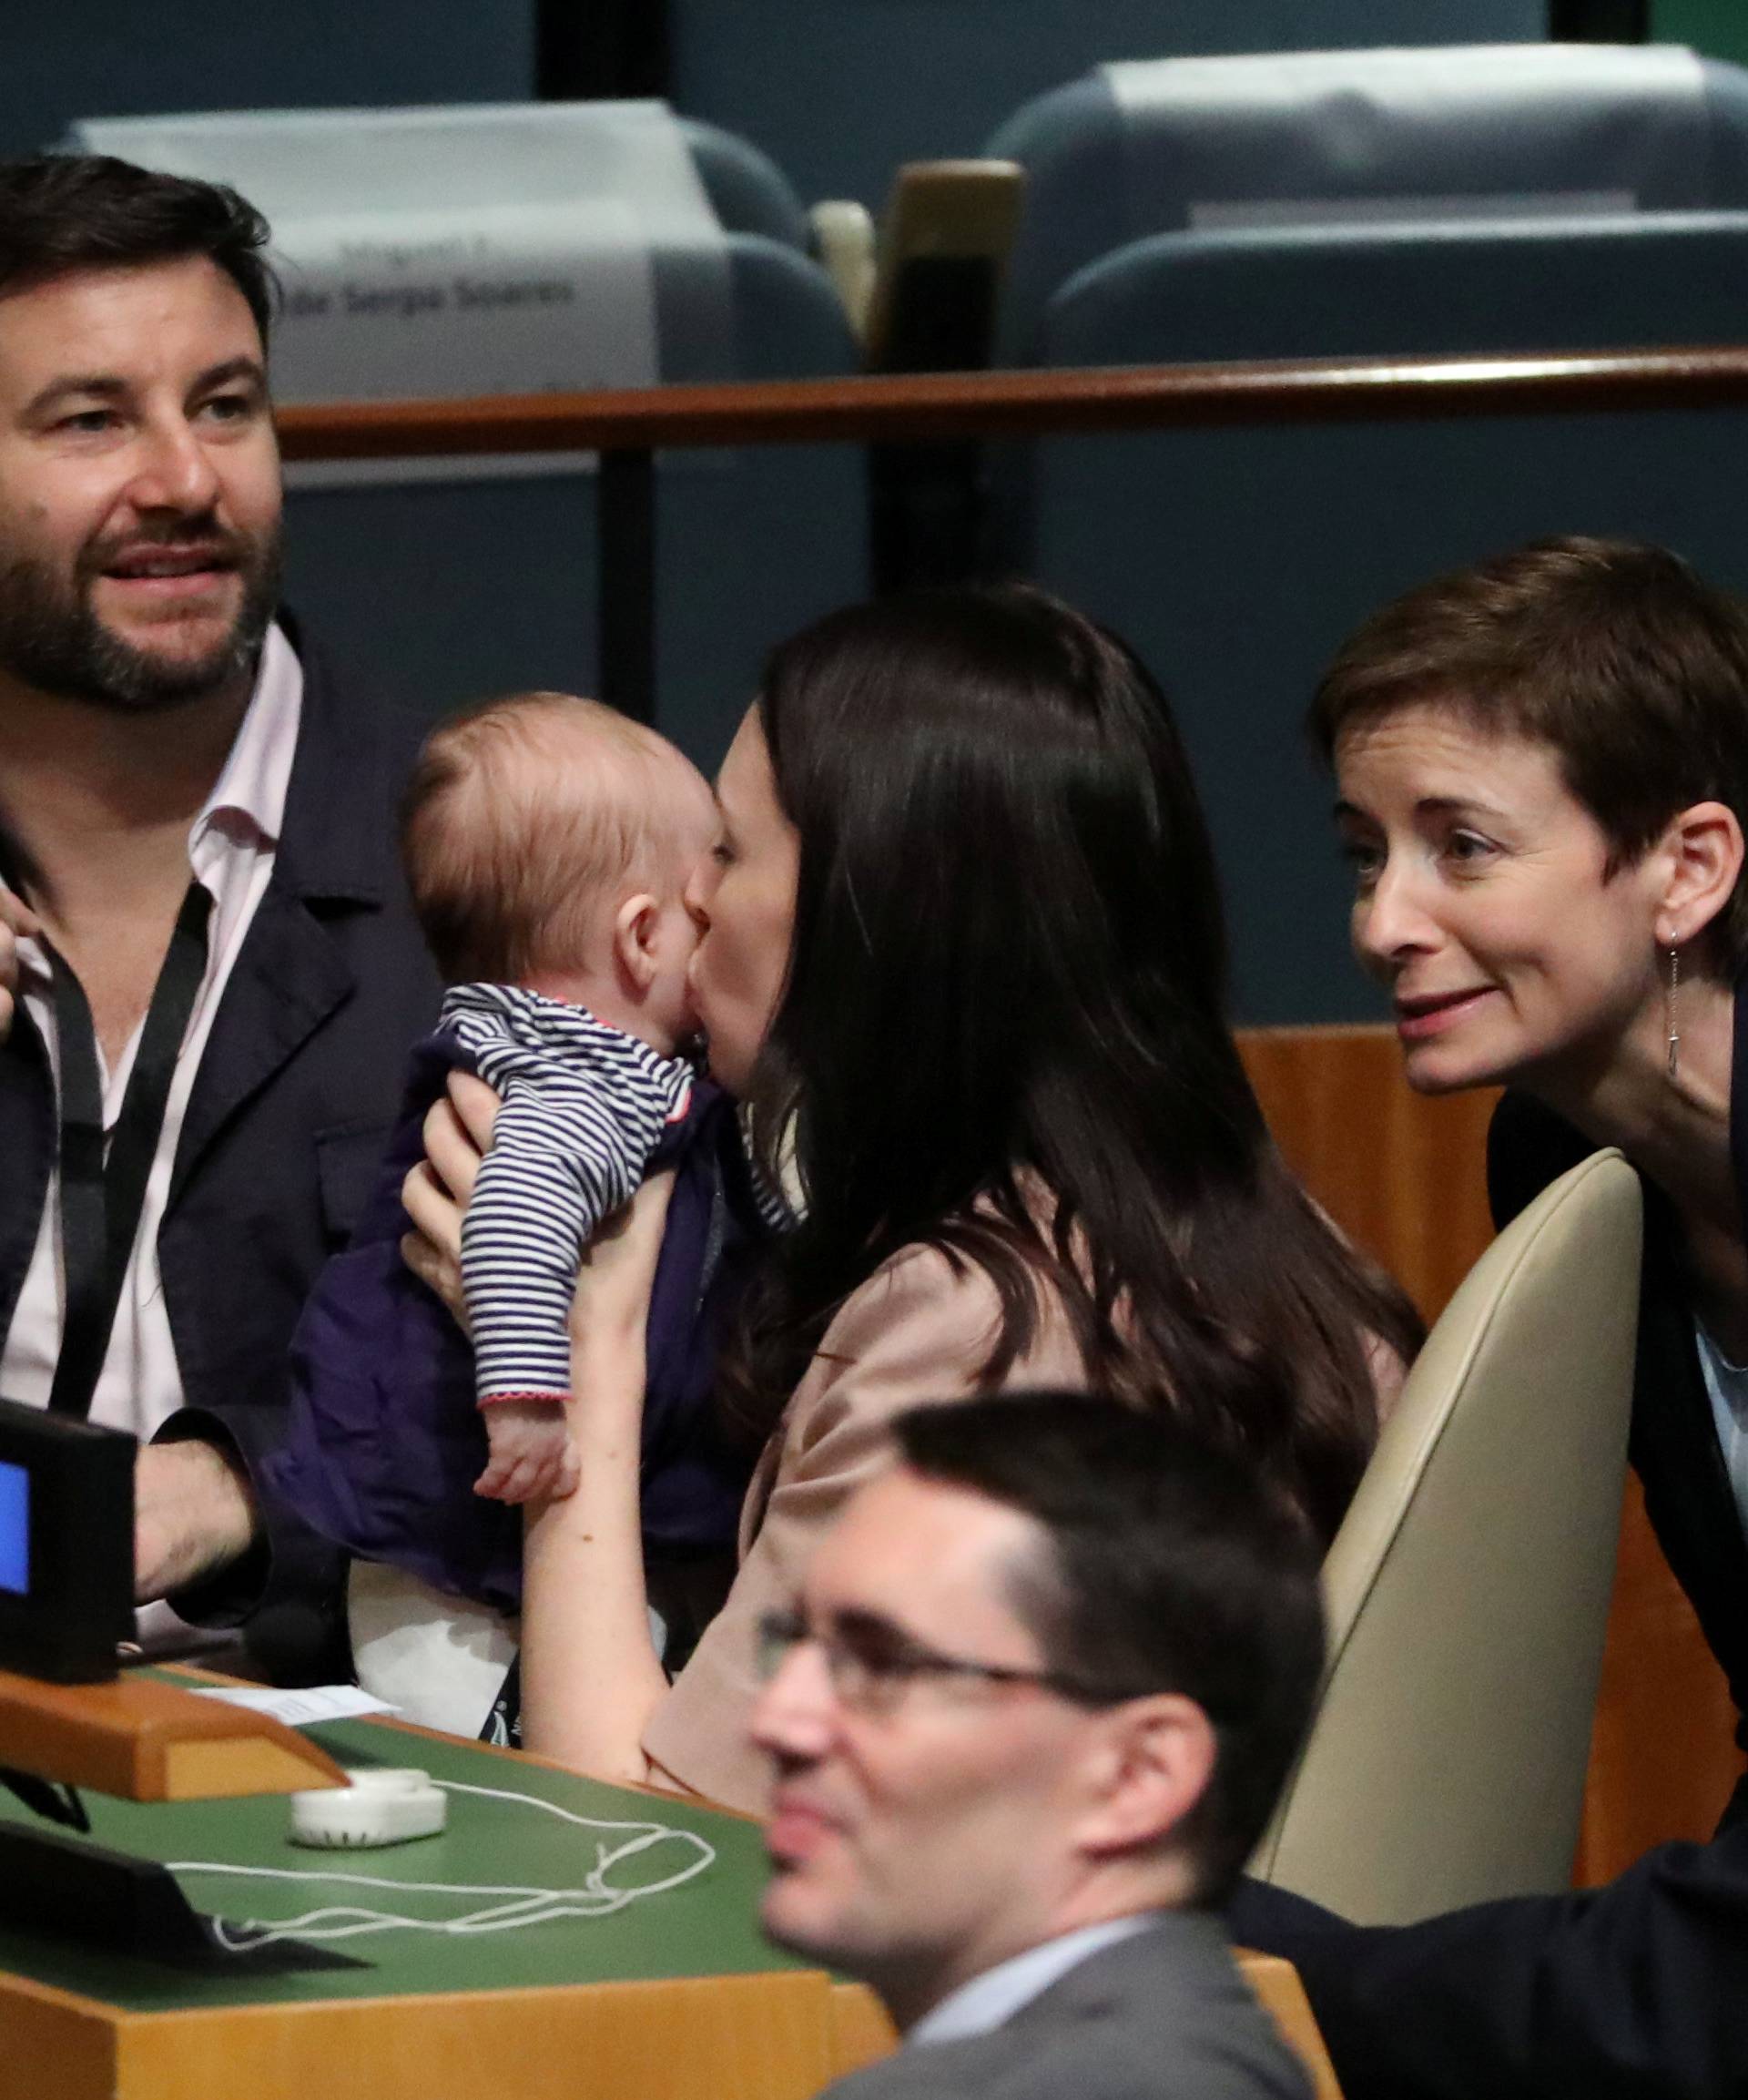 New Zealand Prime Minister Jacinda Ardern kisses her baby Neve before speaking at the Nelson Mandela Peace Summit during the 73rd United Nations General Assembly in New York